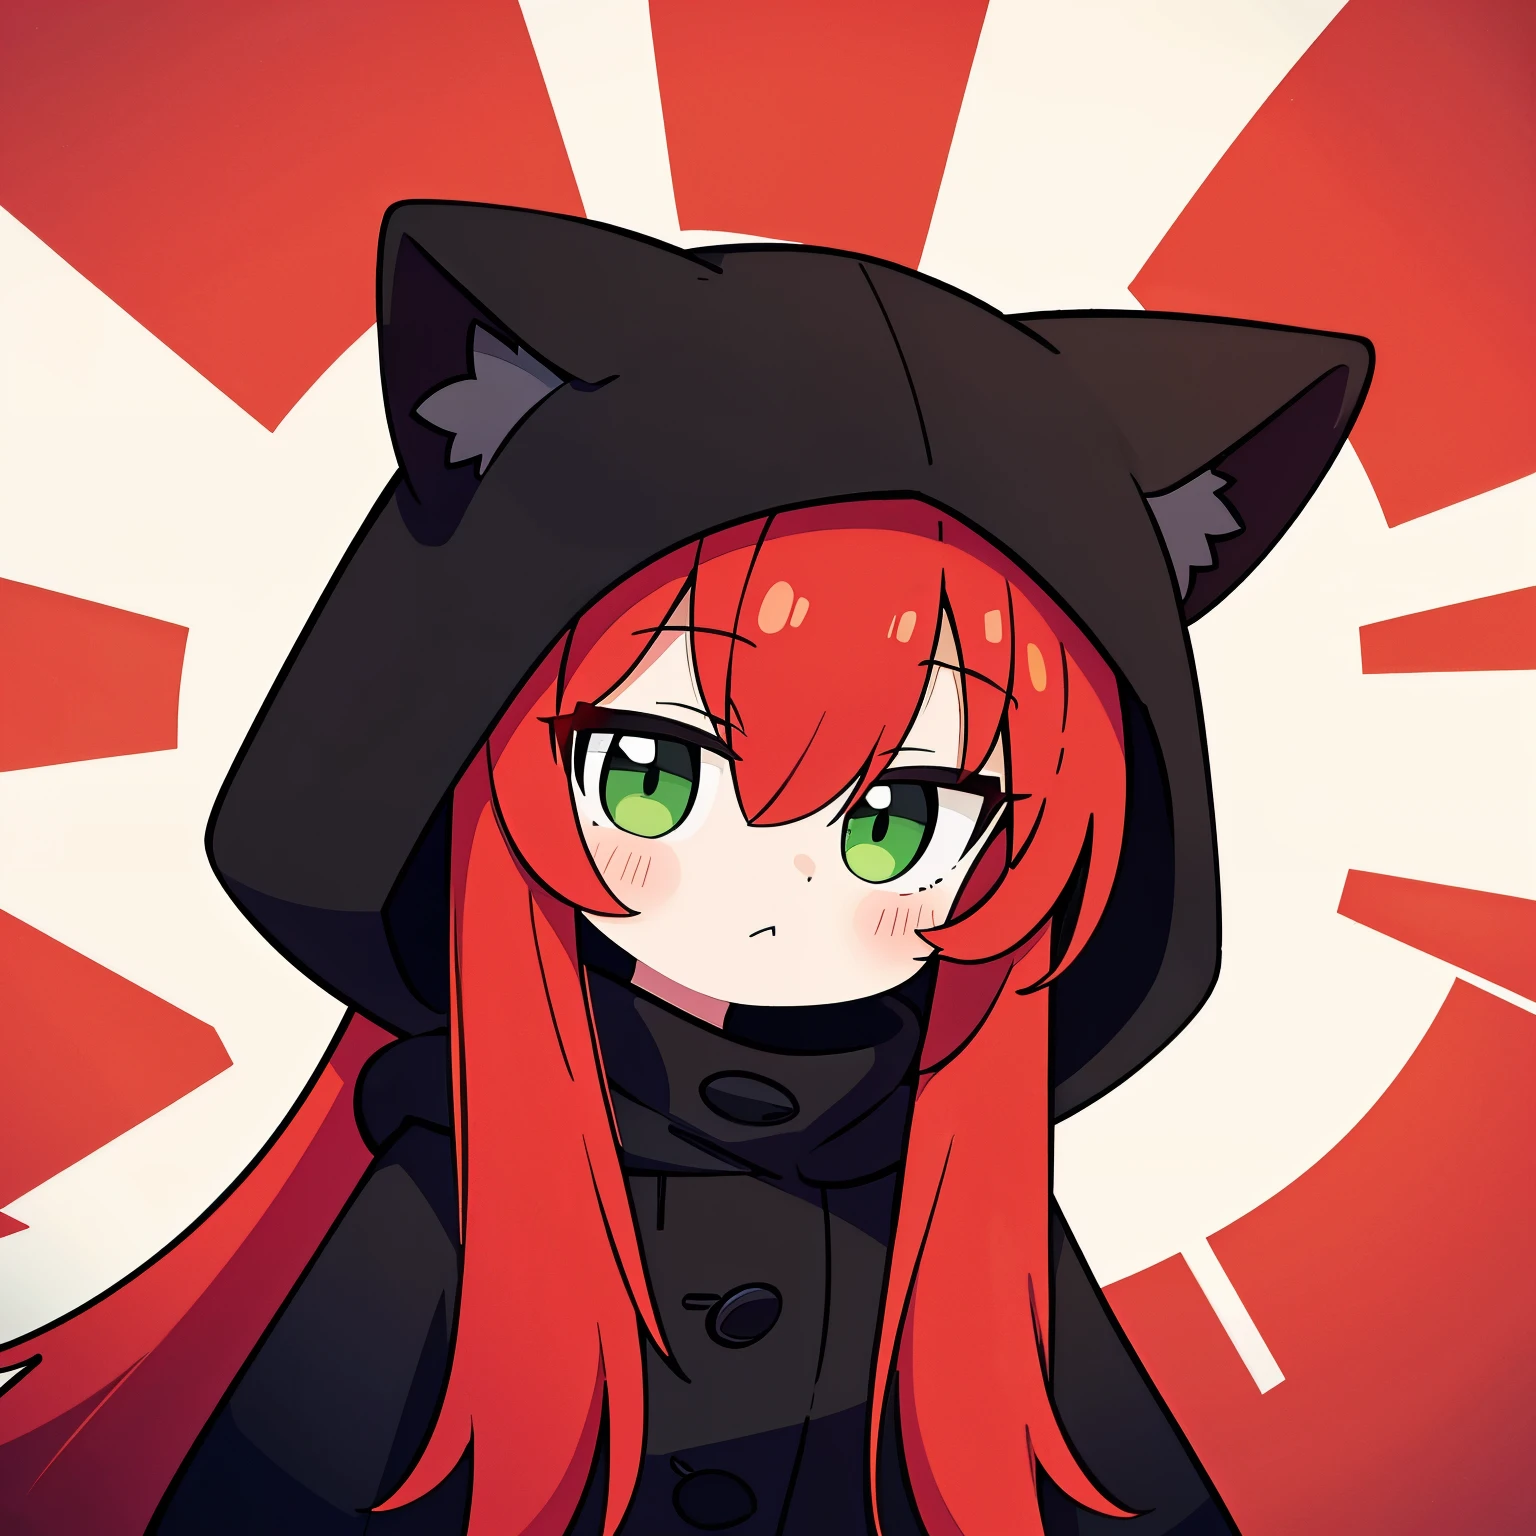 Anime girl with red hair and black cat ears - SeaArt AI